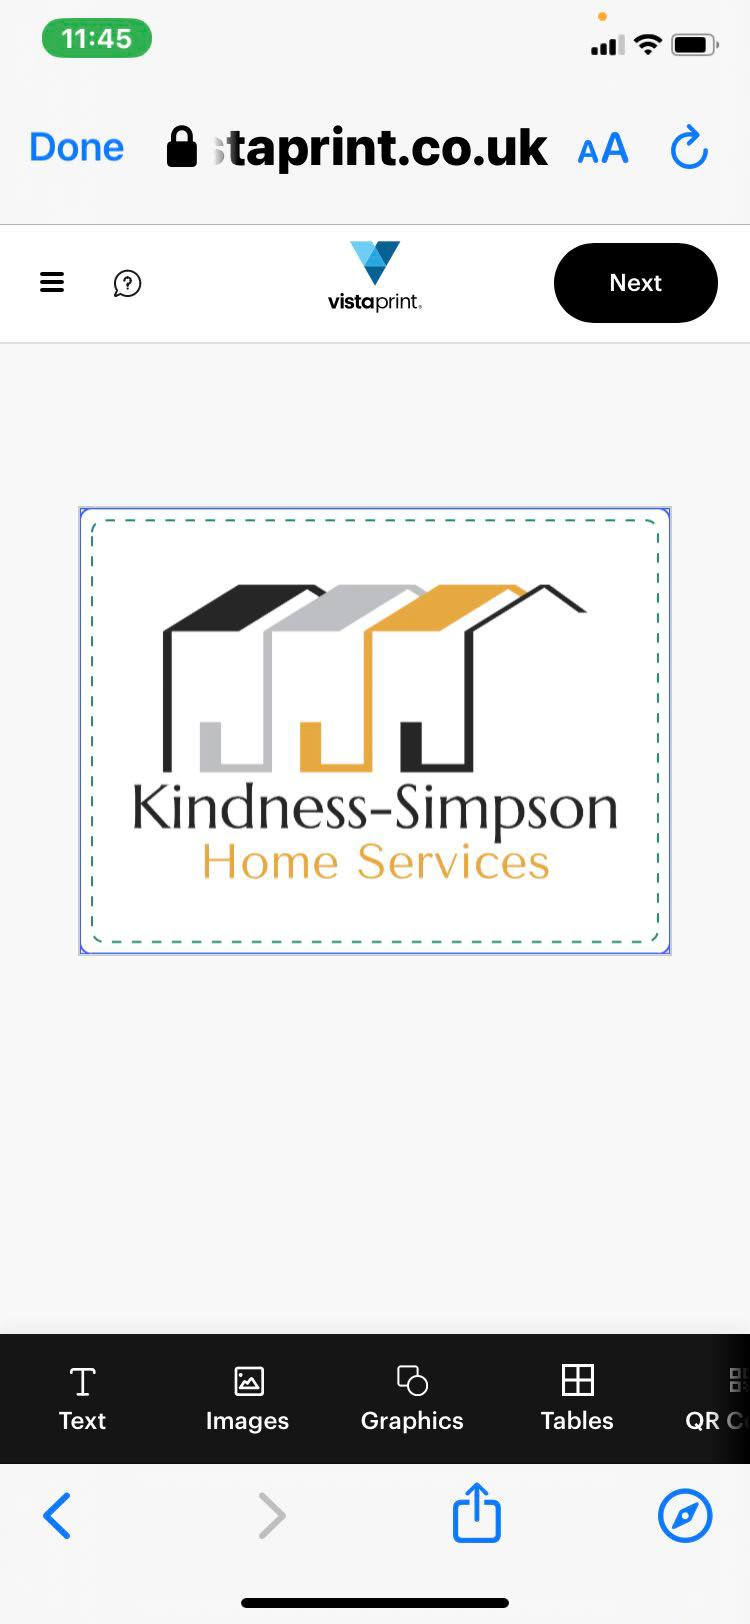 Kindness-Simpson Home Services Wigton 01697 346259